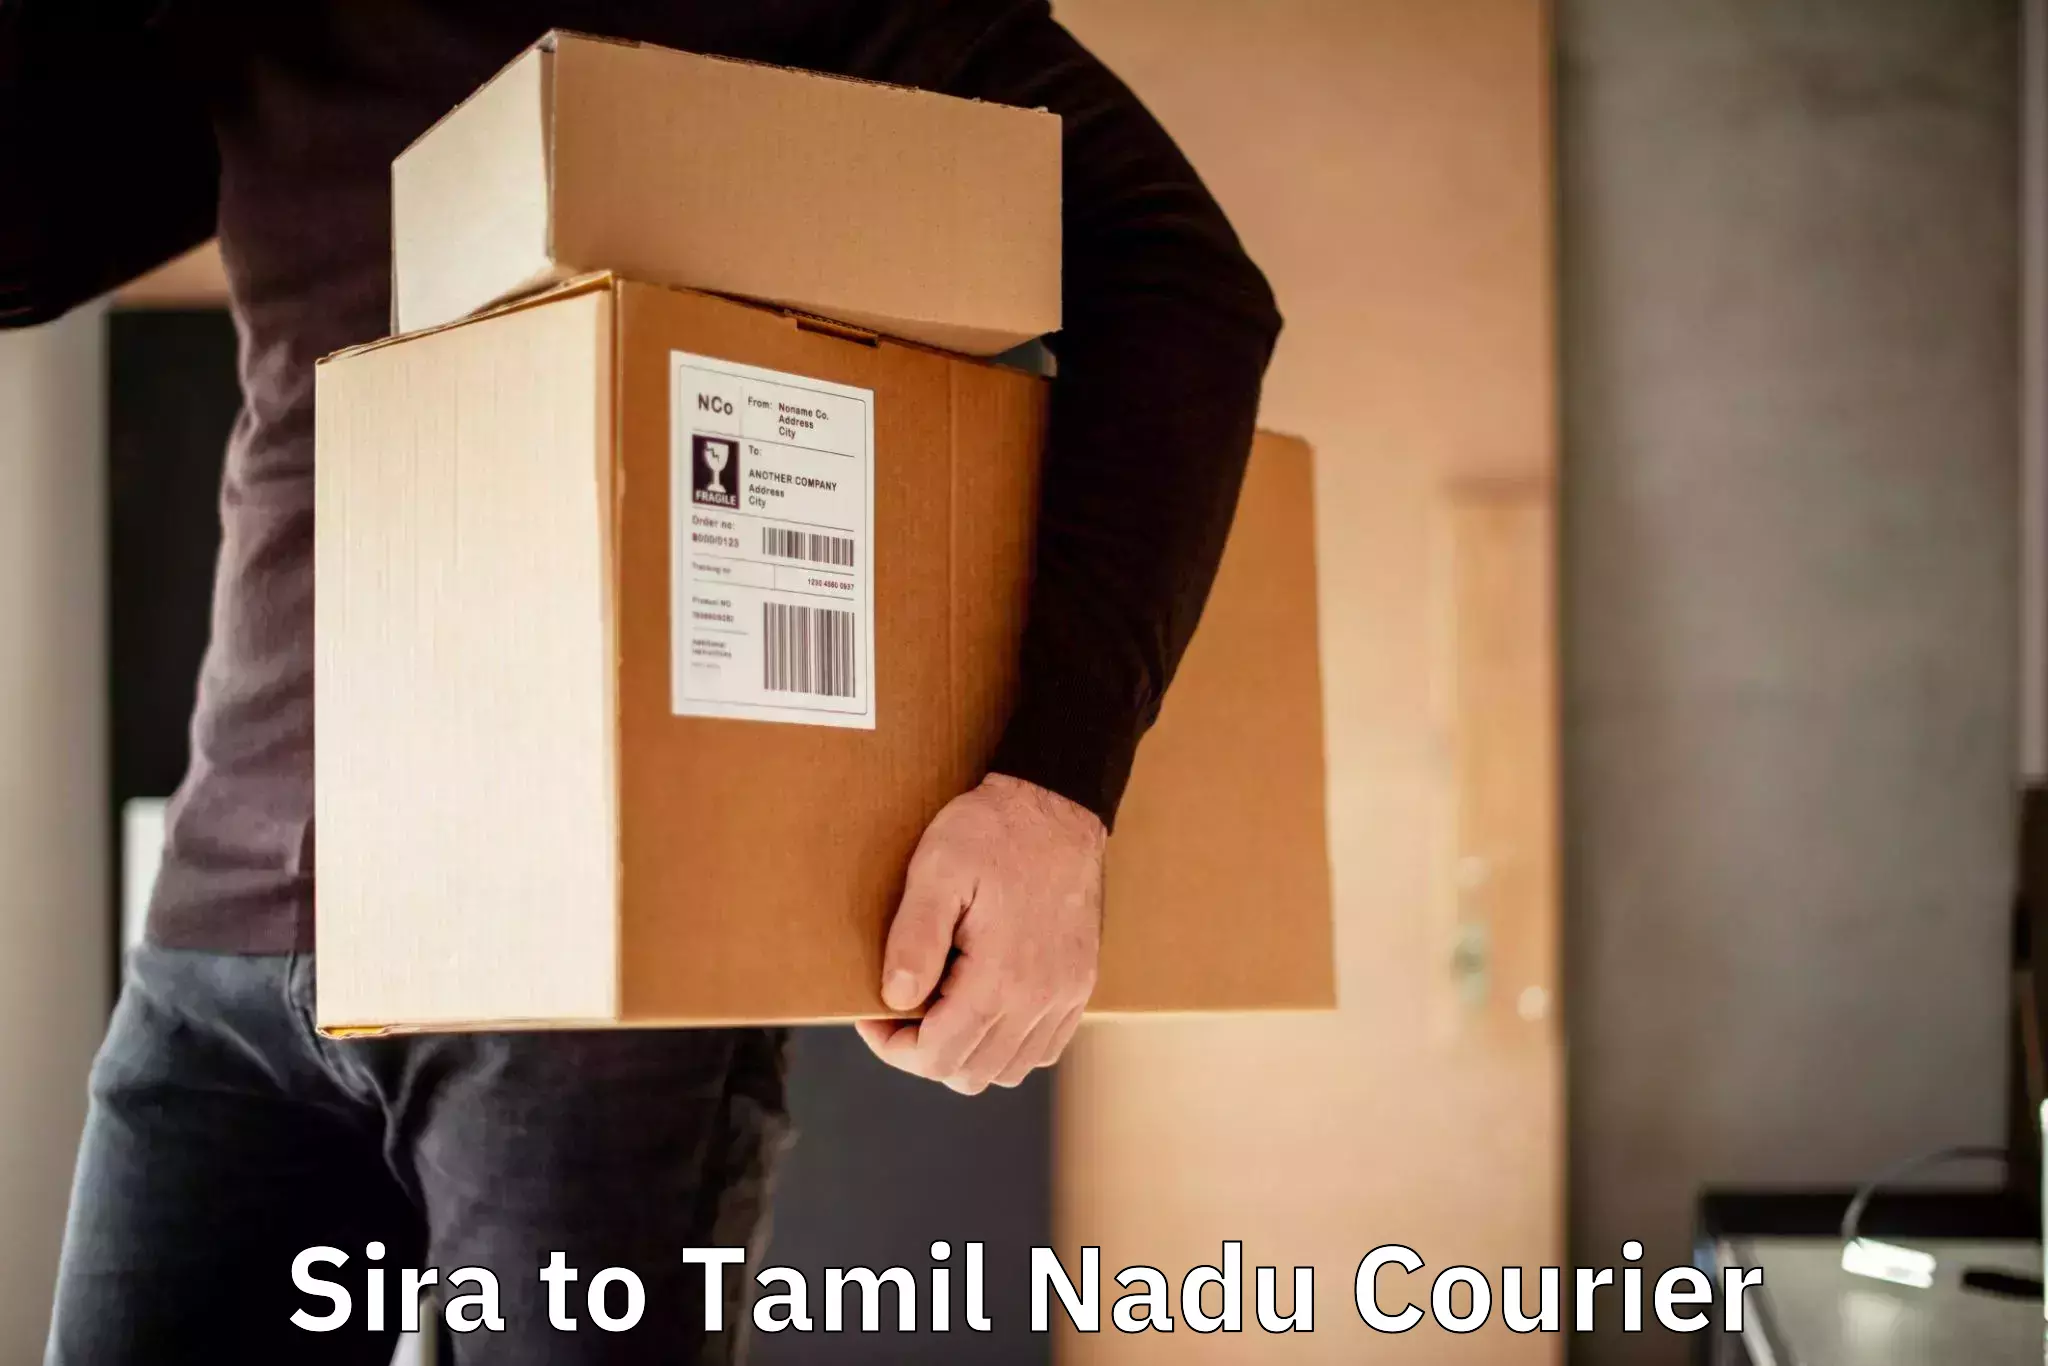 Reliable courier service in Sira to Tuticorin Port